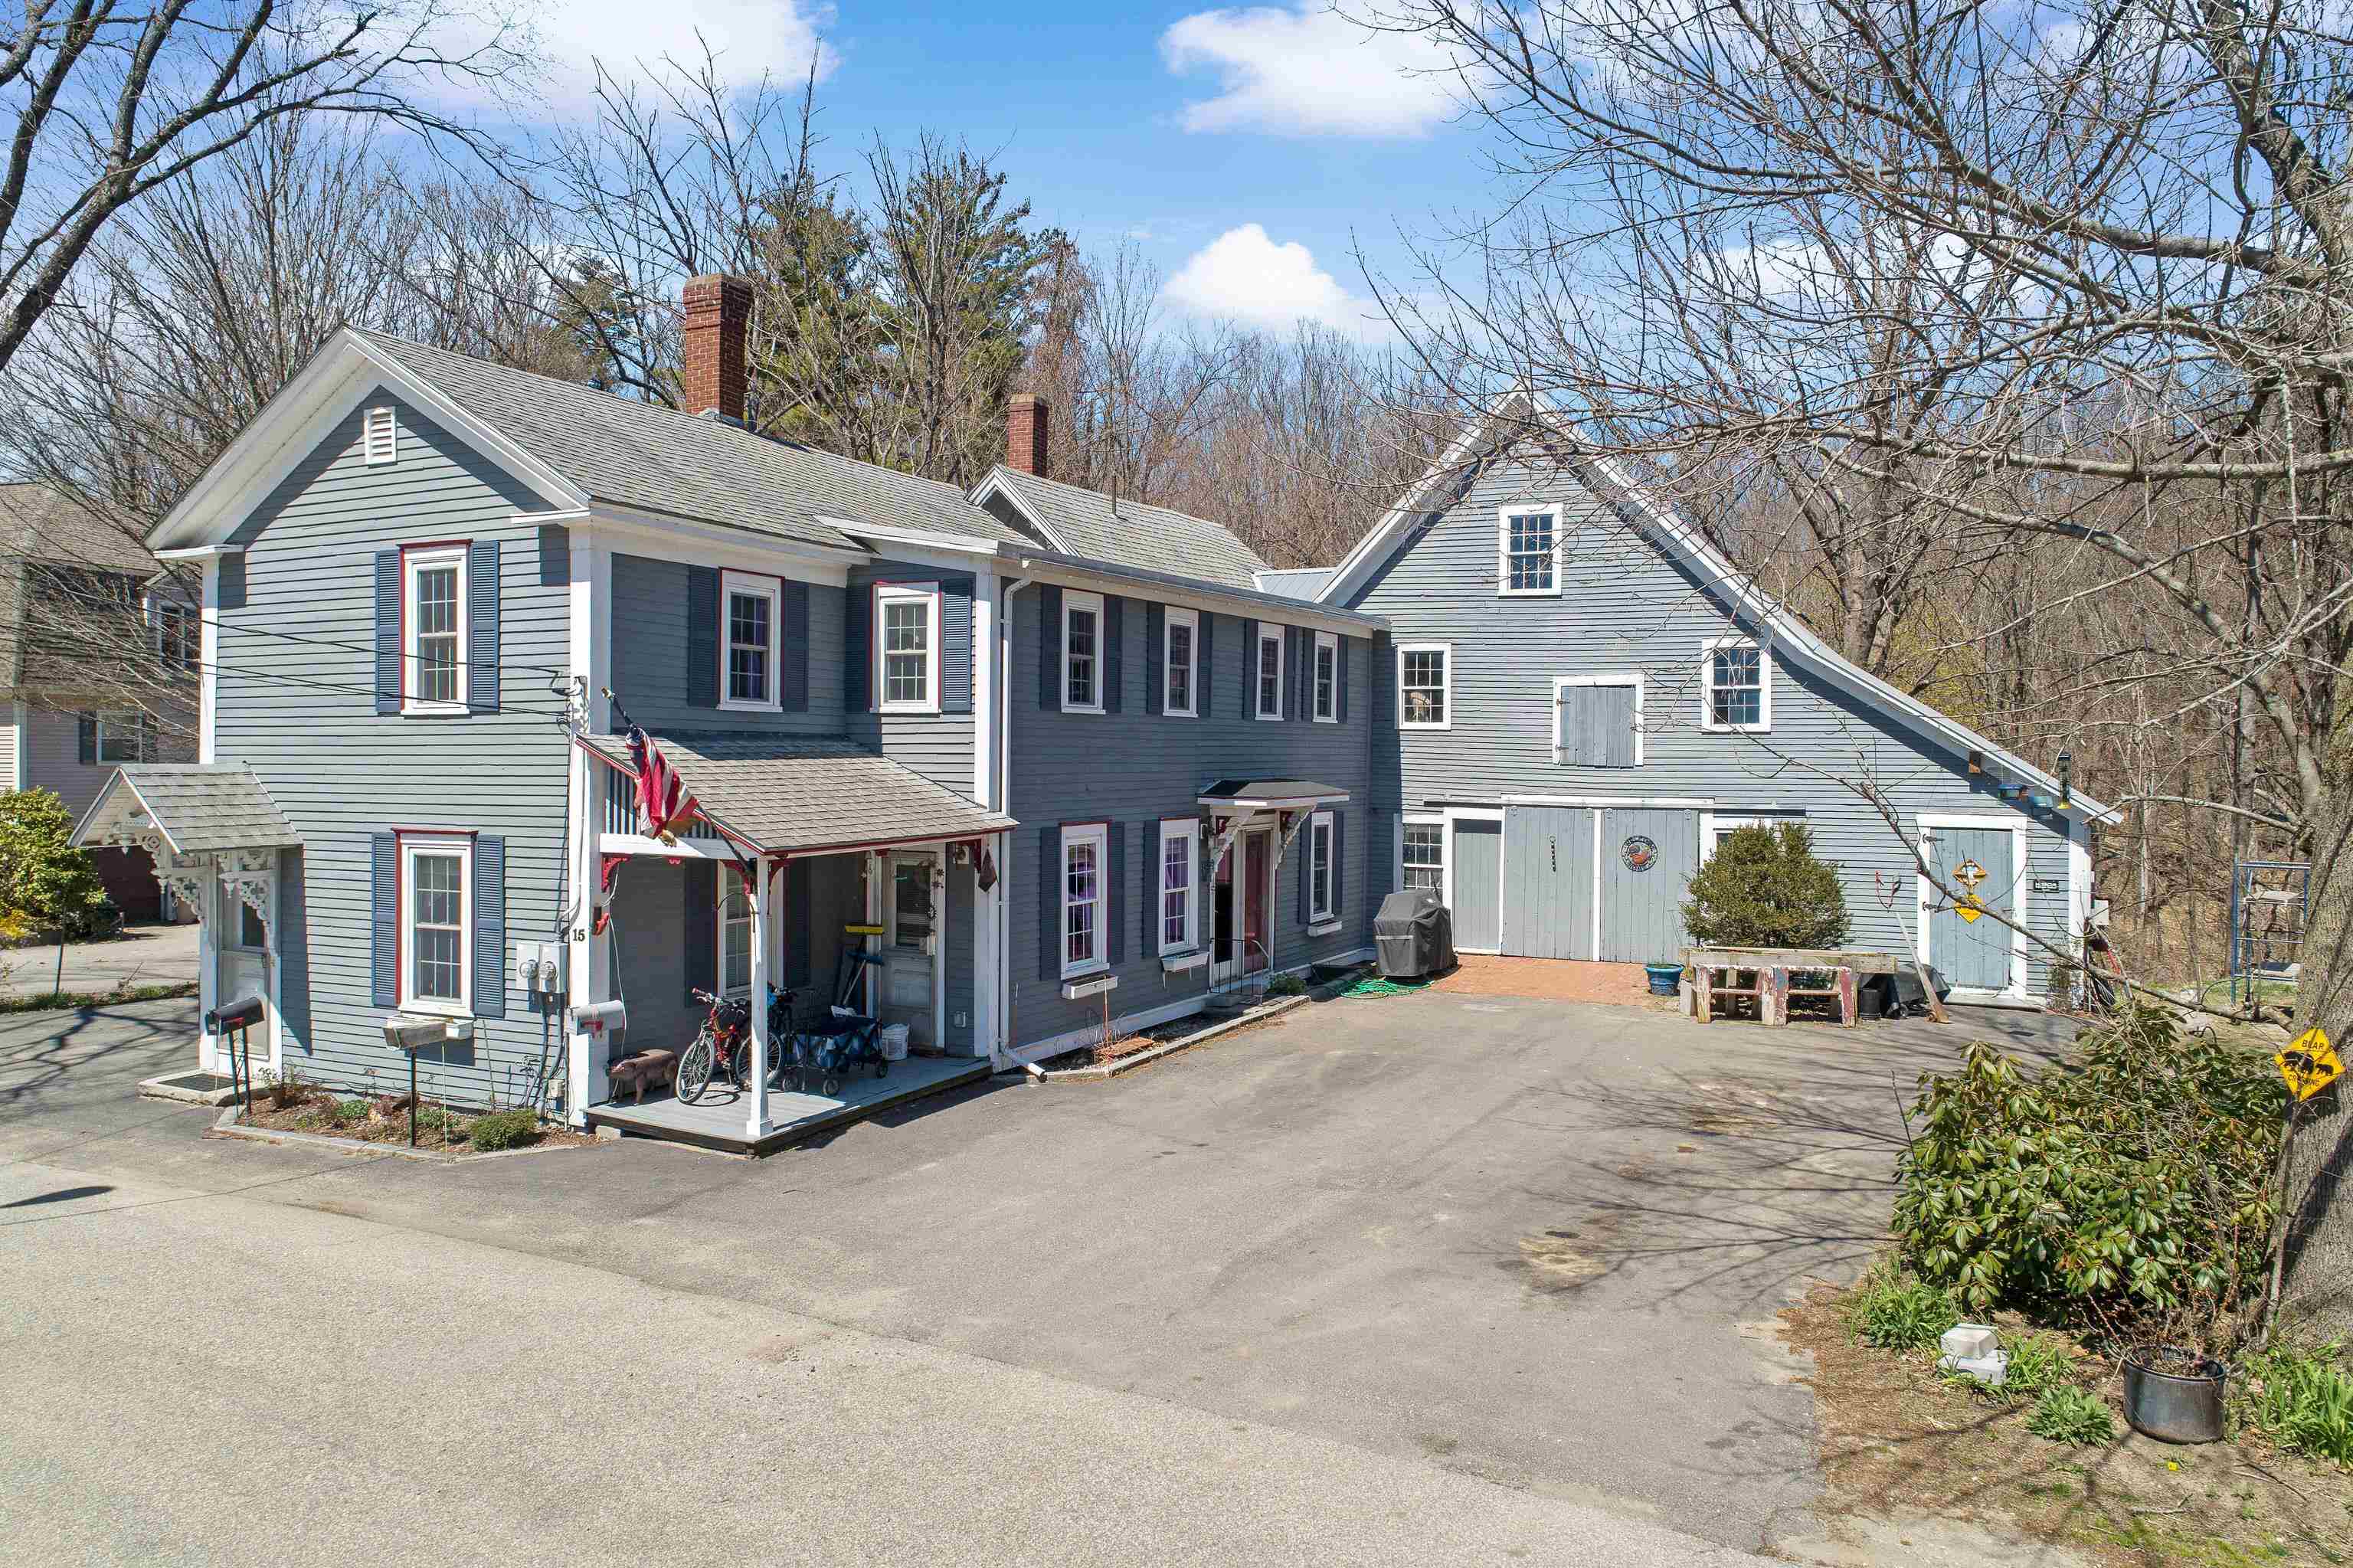 BOSCAWEN NH Multi Family Homes for sale